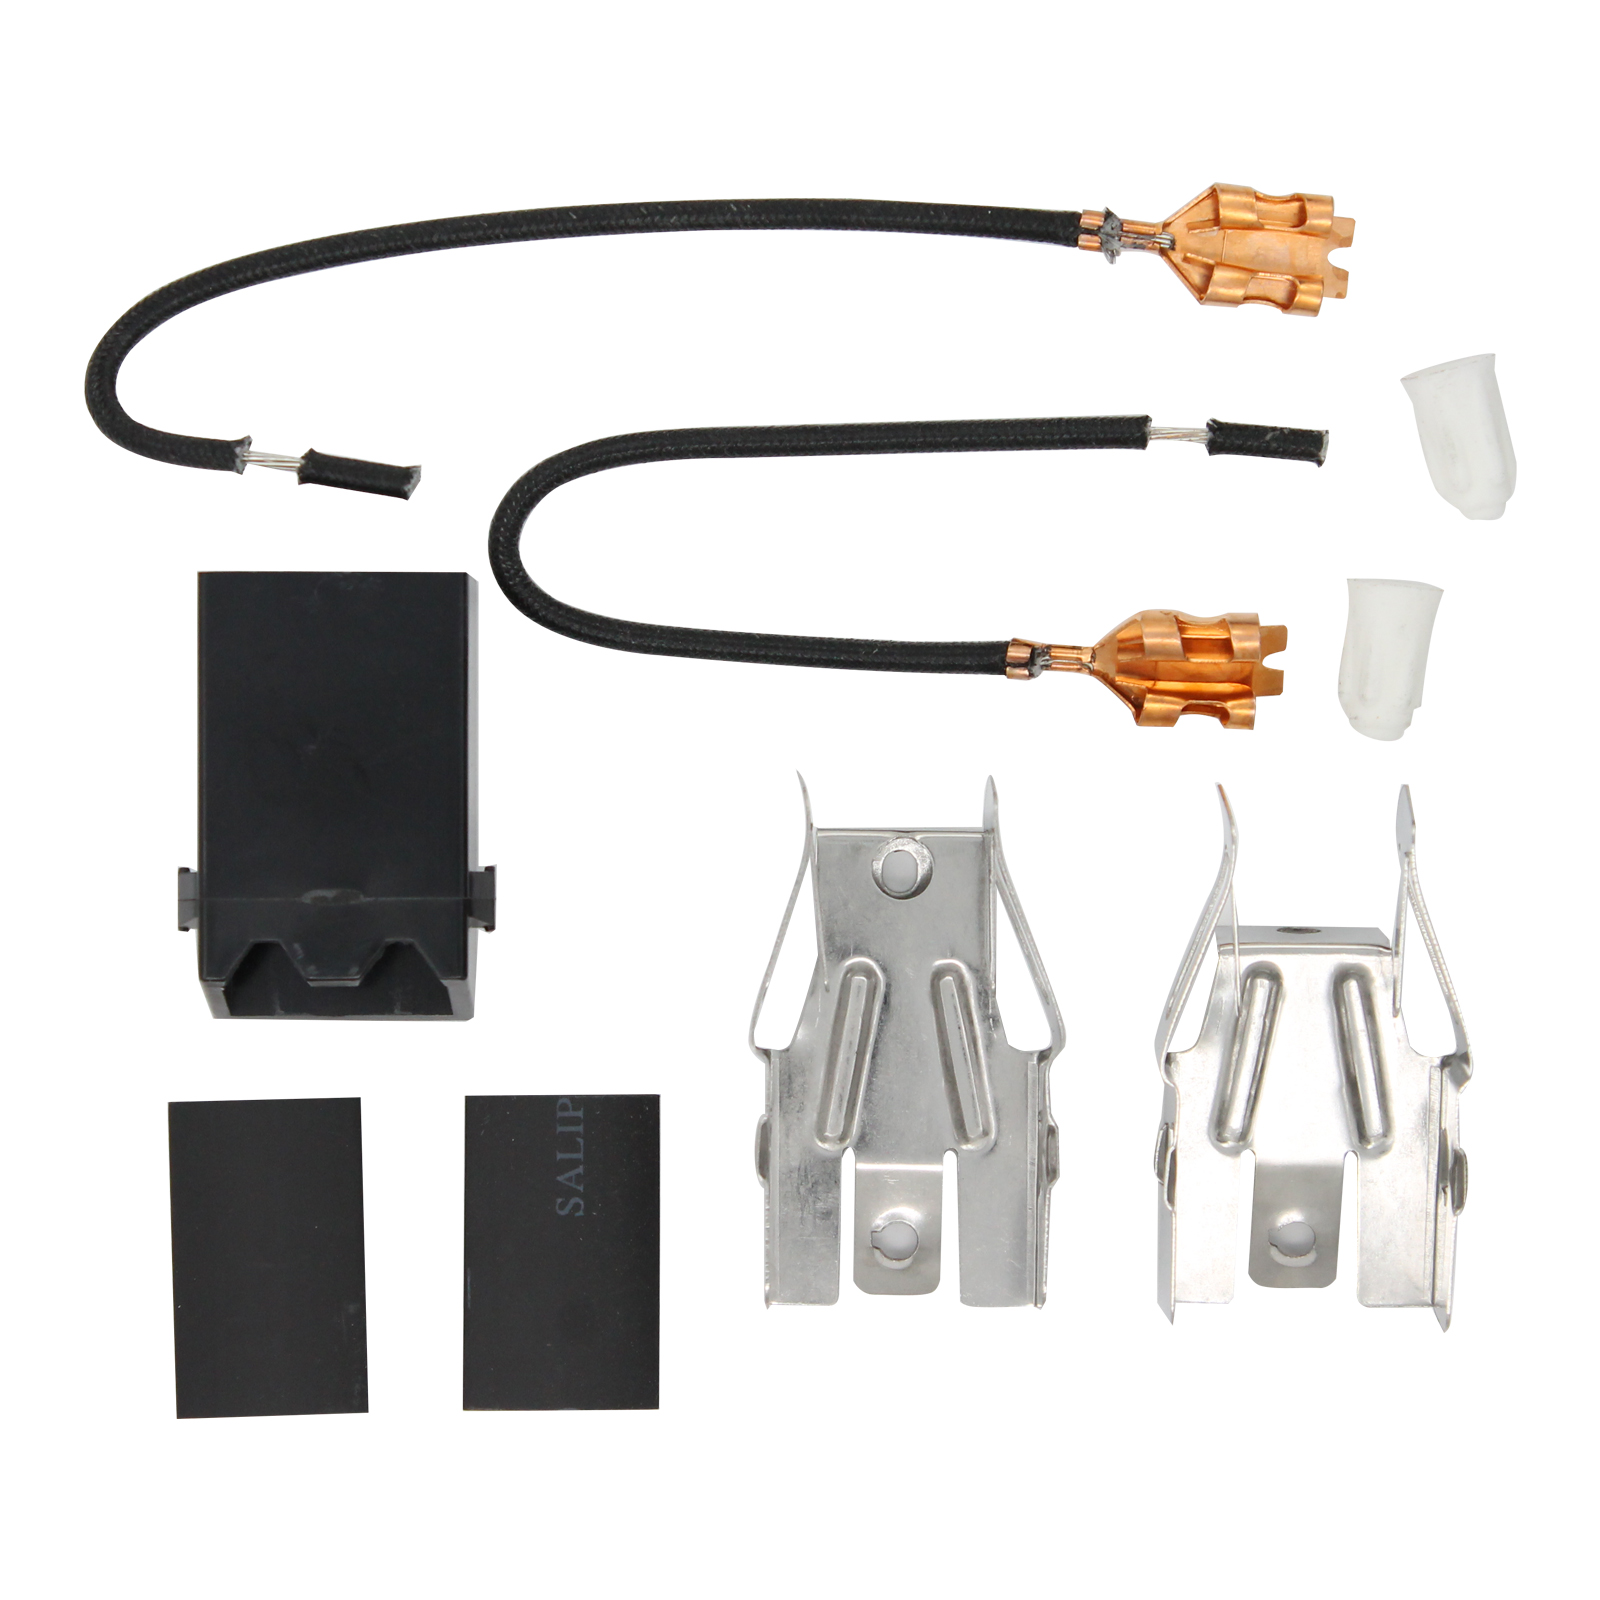 330031 Top Burner Receptacle Kit Replacement for Amana GBE22AA5PT (P1142484N L) Range/Cooktop/Oven - Compatible with 330031 Range Burner Receptacle Kit - UpStart Components Brand - image 4 of 4